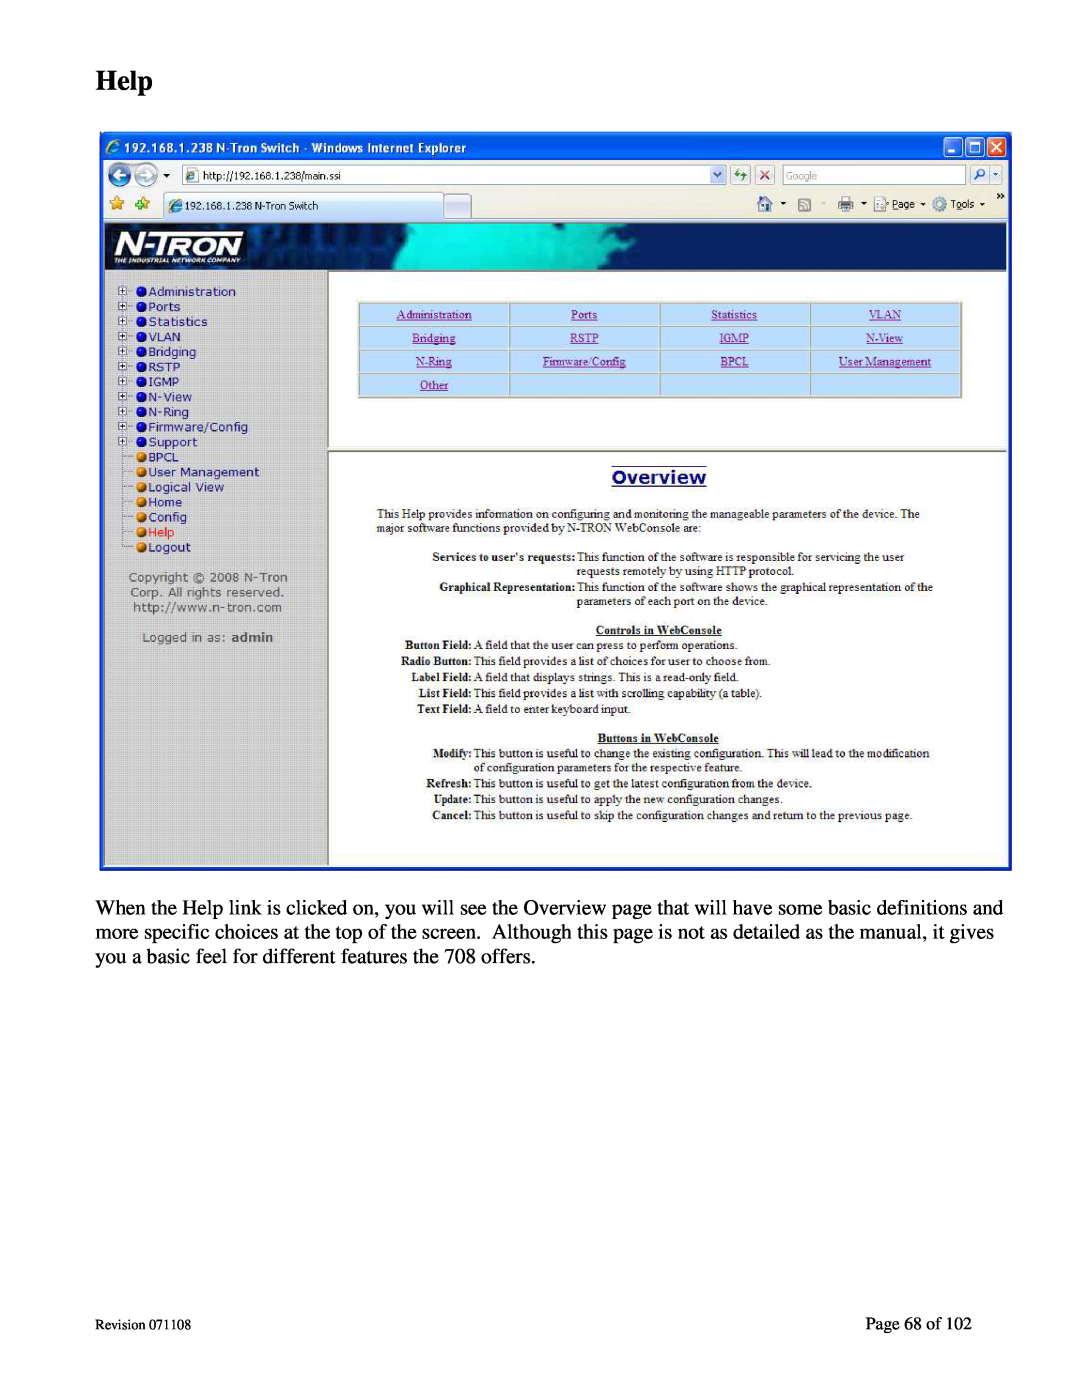 N-Tron 708M12 user manual Help, Page 68 of, Revision 